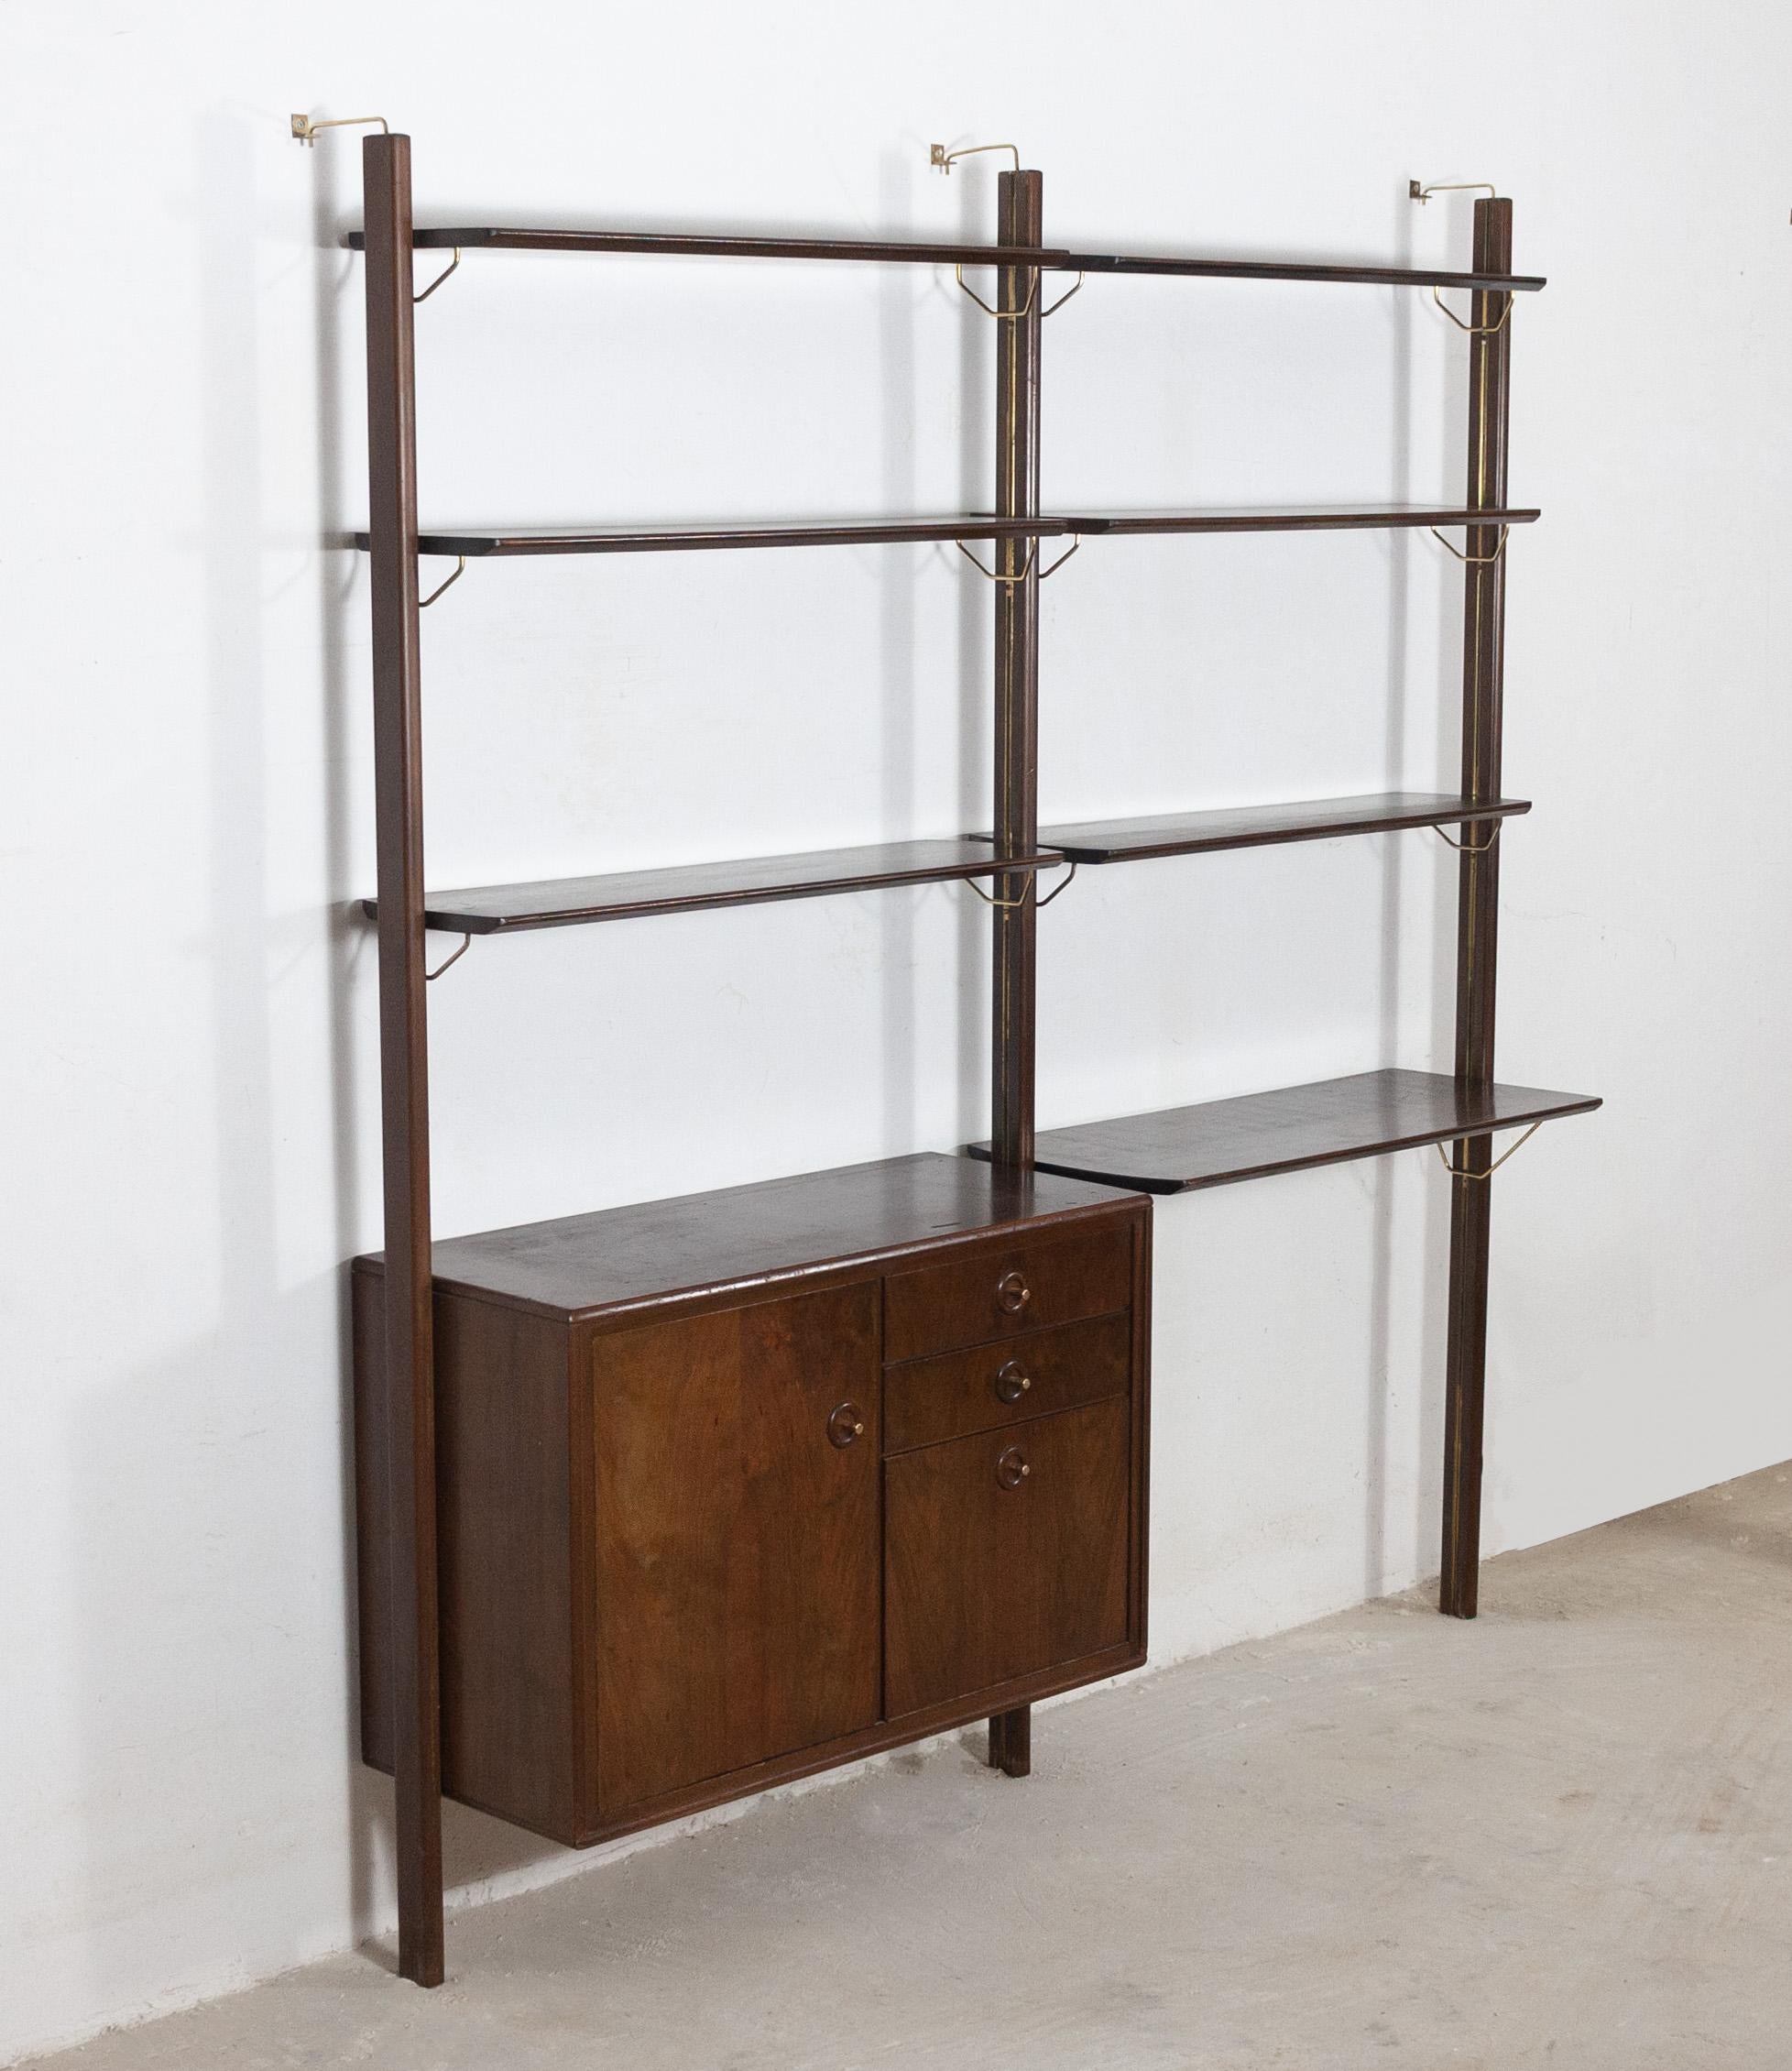 Rare wall system designed by William Watting for Fristho Franeker. The Netherlands, 1960s. Unique system featuring rails running down the uprights which the modular shelves and cabinets slide into for full vertical positioning freedom and brass